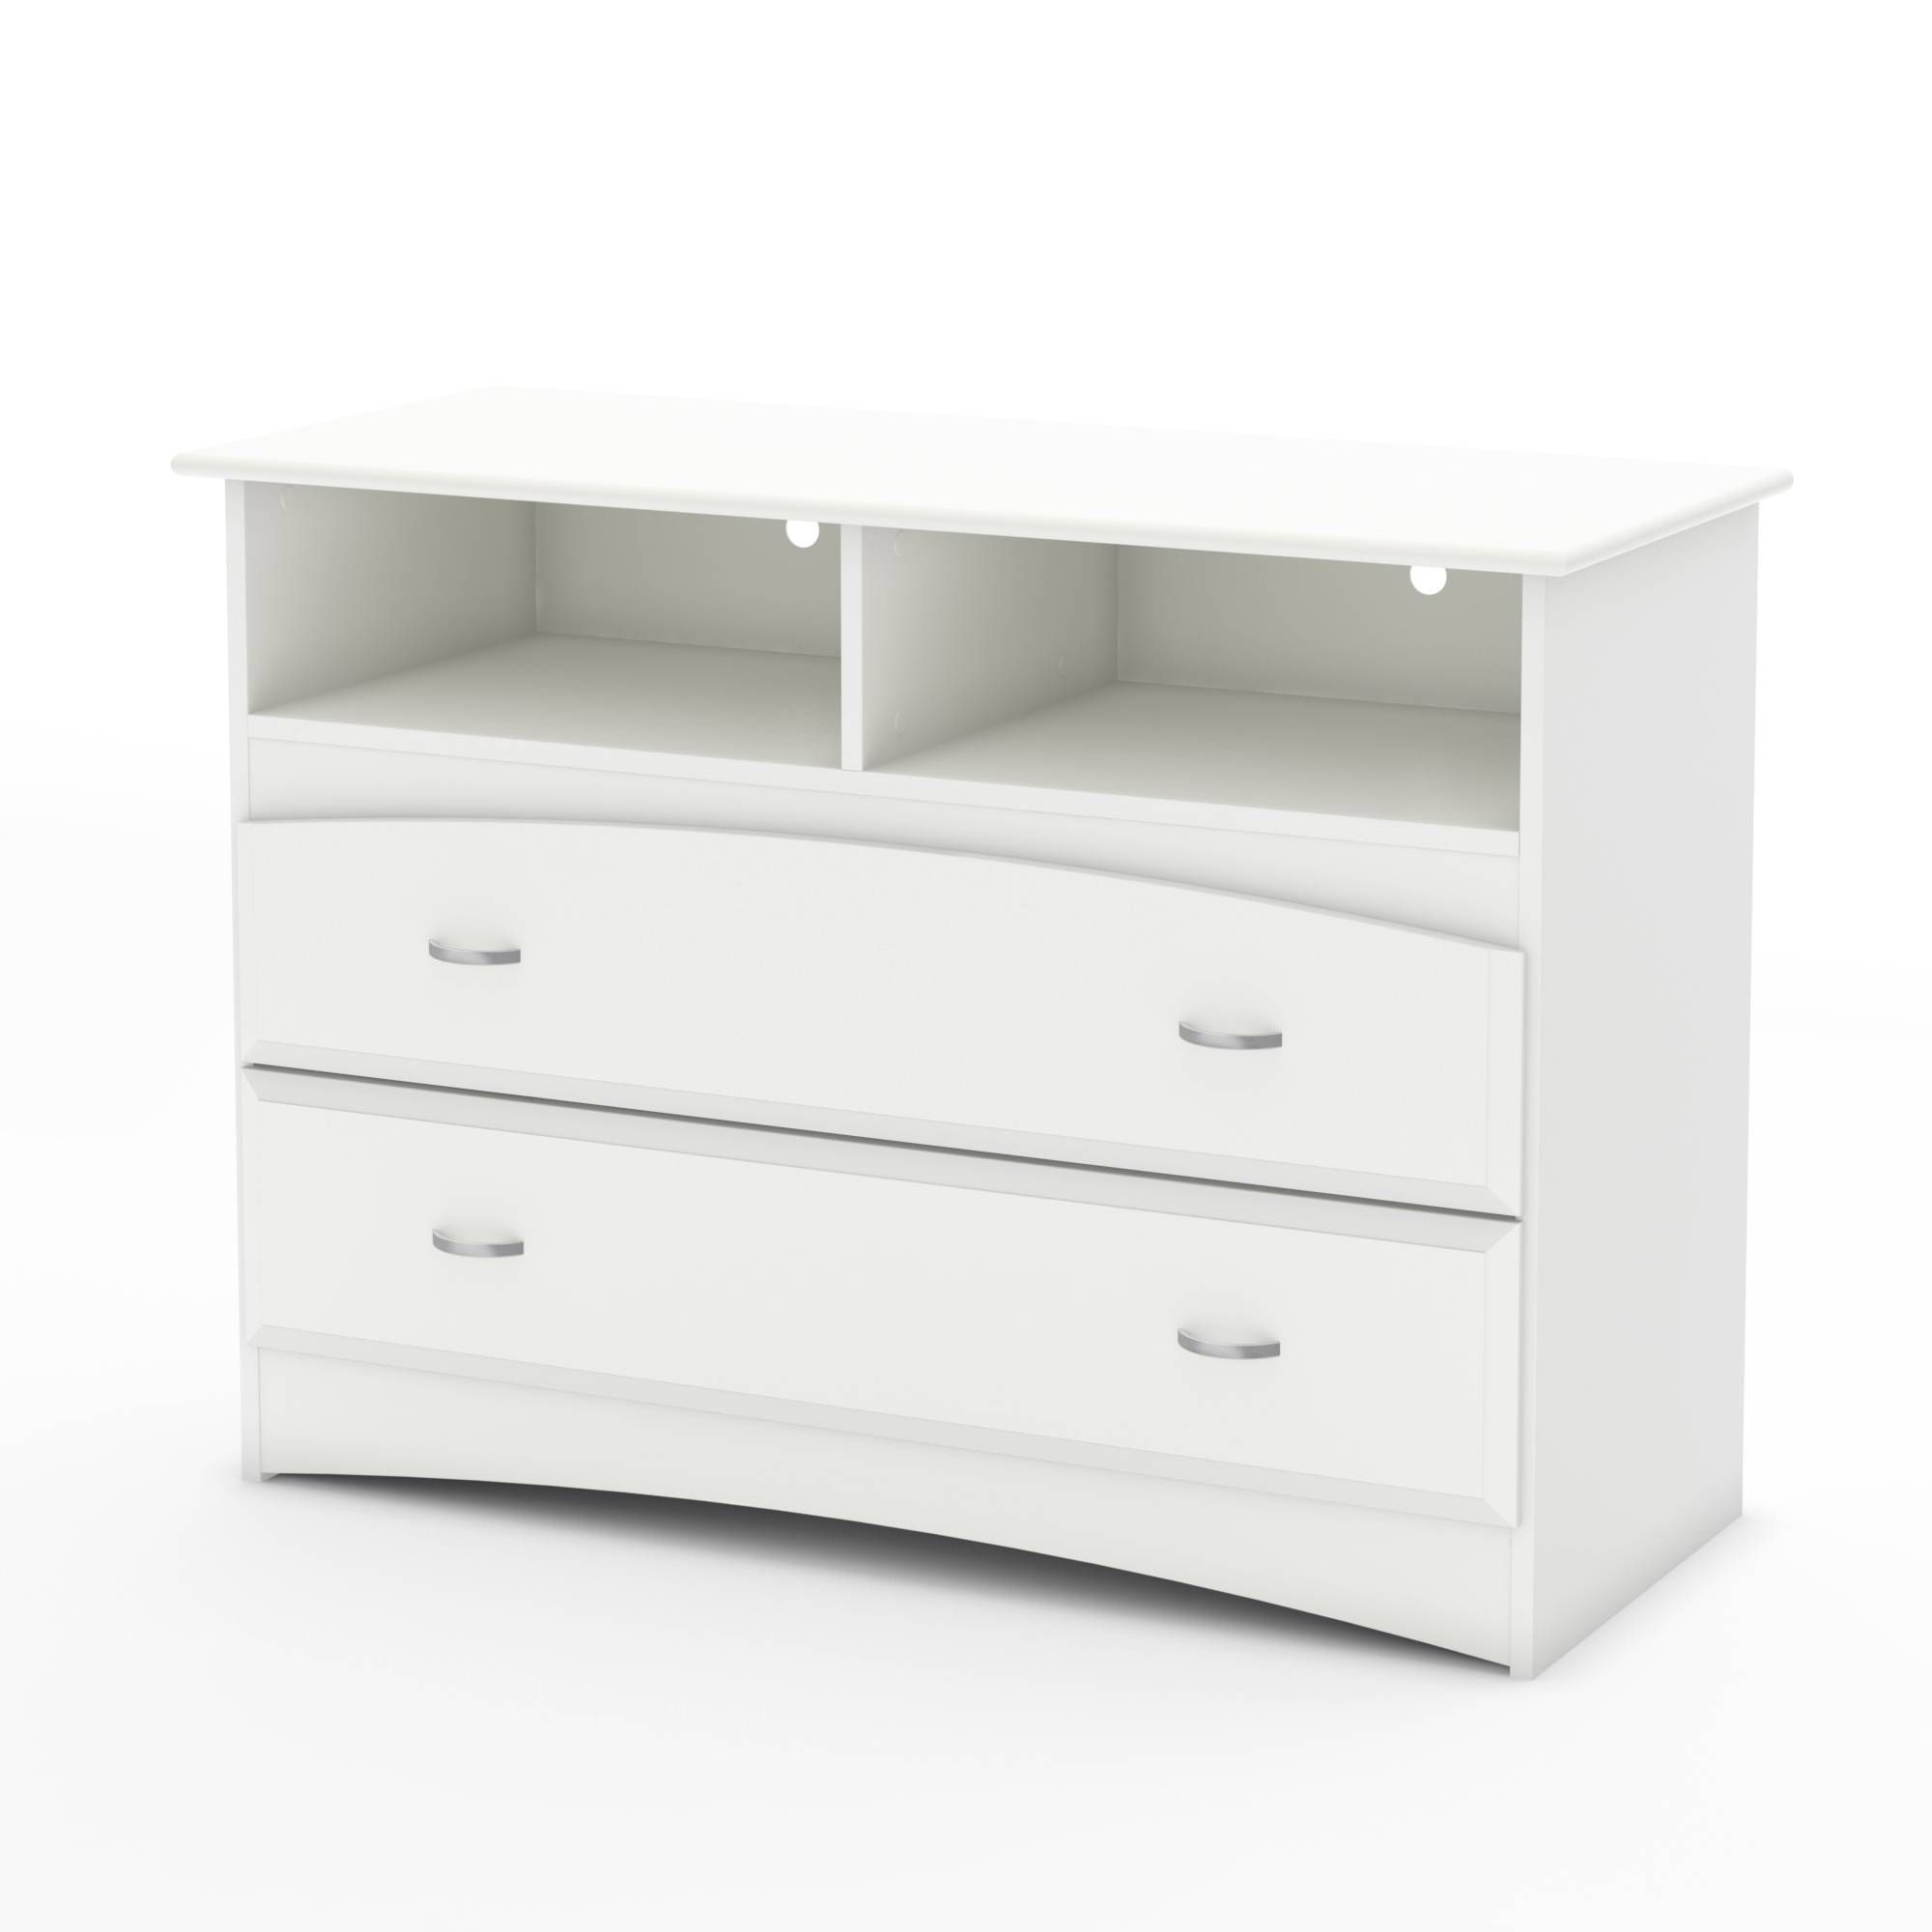 White Tv Stand For Bedroom Part – 35: Innovative White Tv Stands Regarding Small White Tv Cabinets (View 14 of 15)